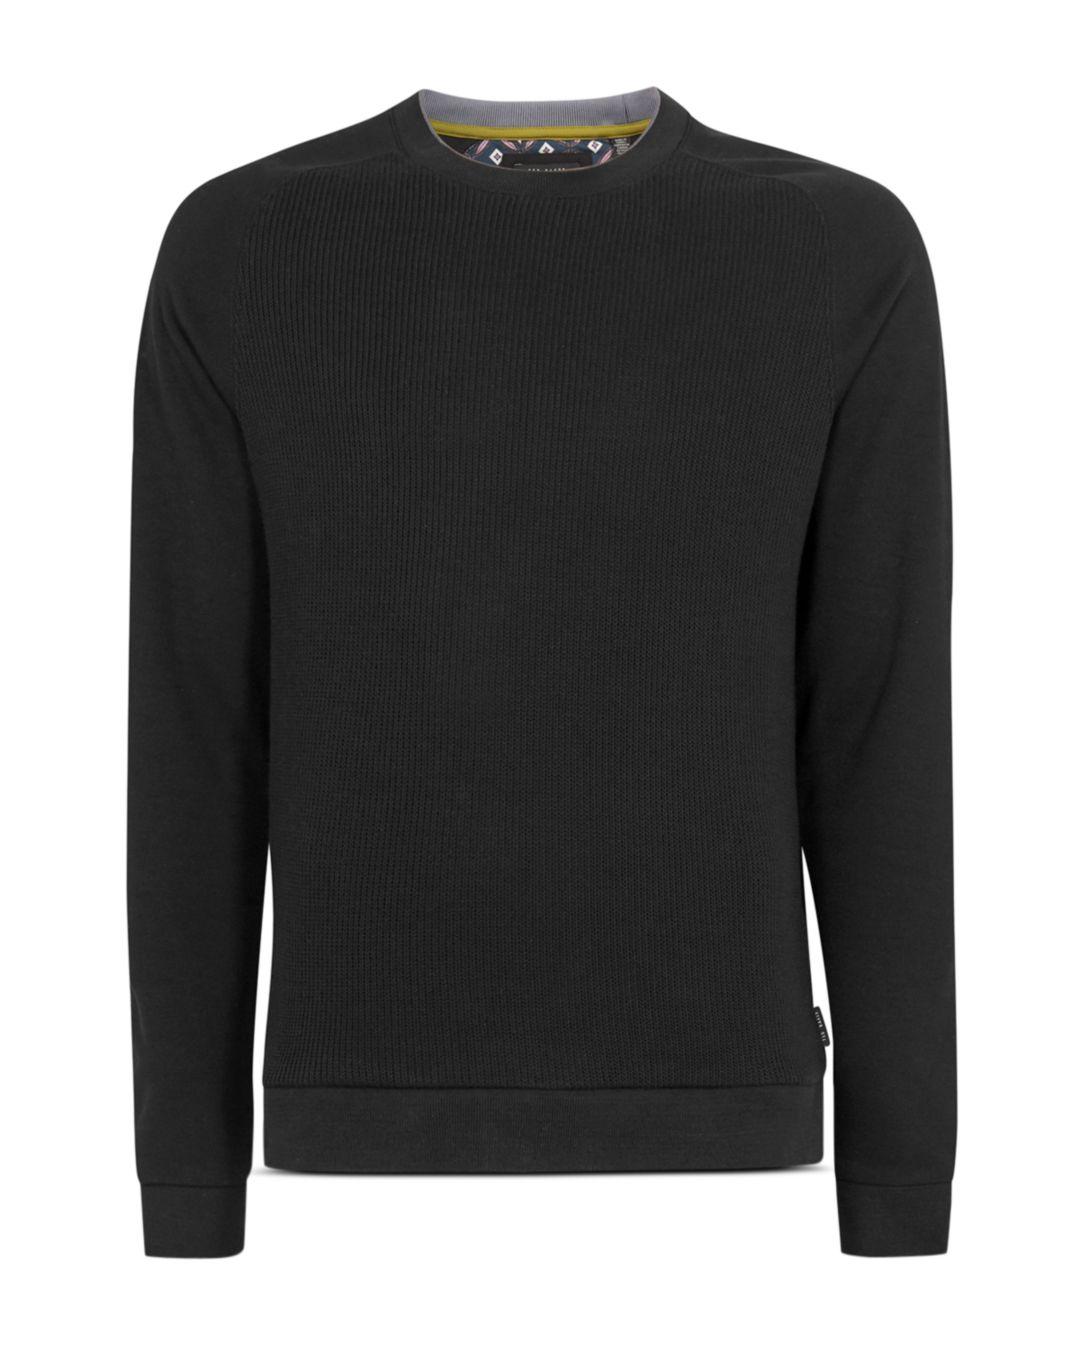 Ted Baker Pied Sweat Top in Black